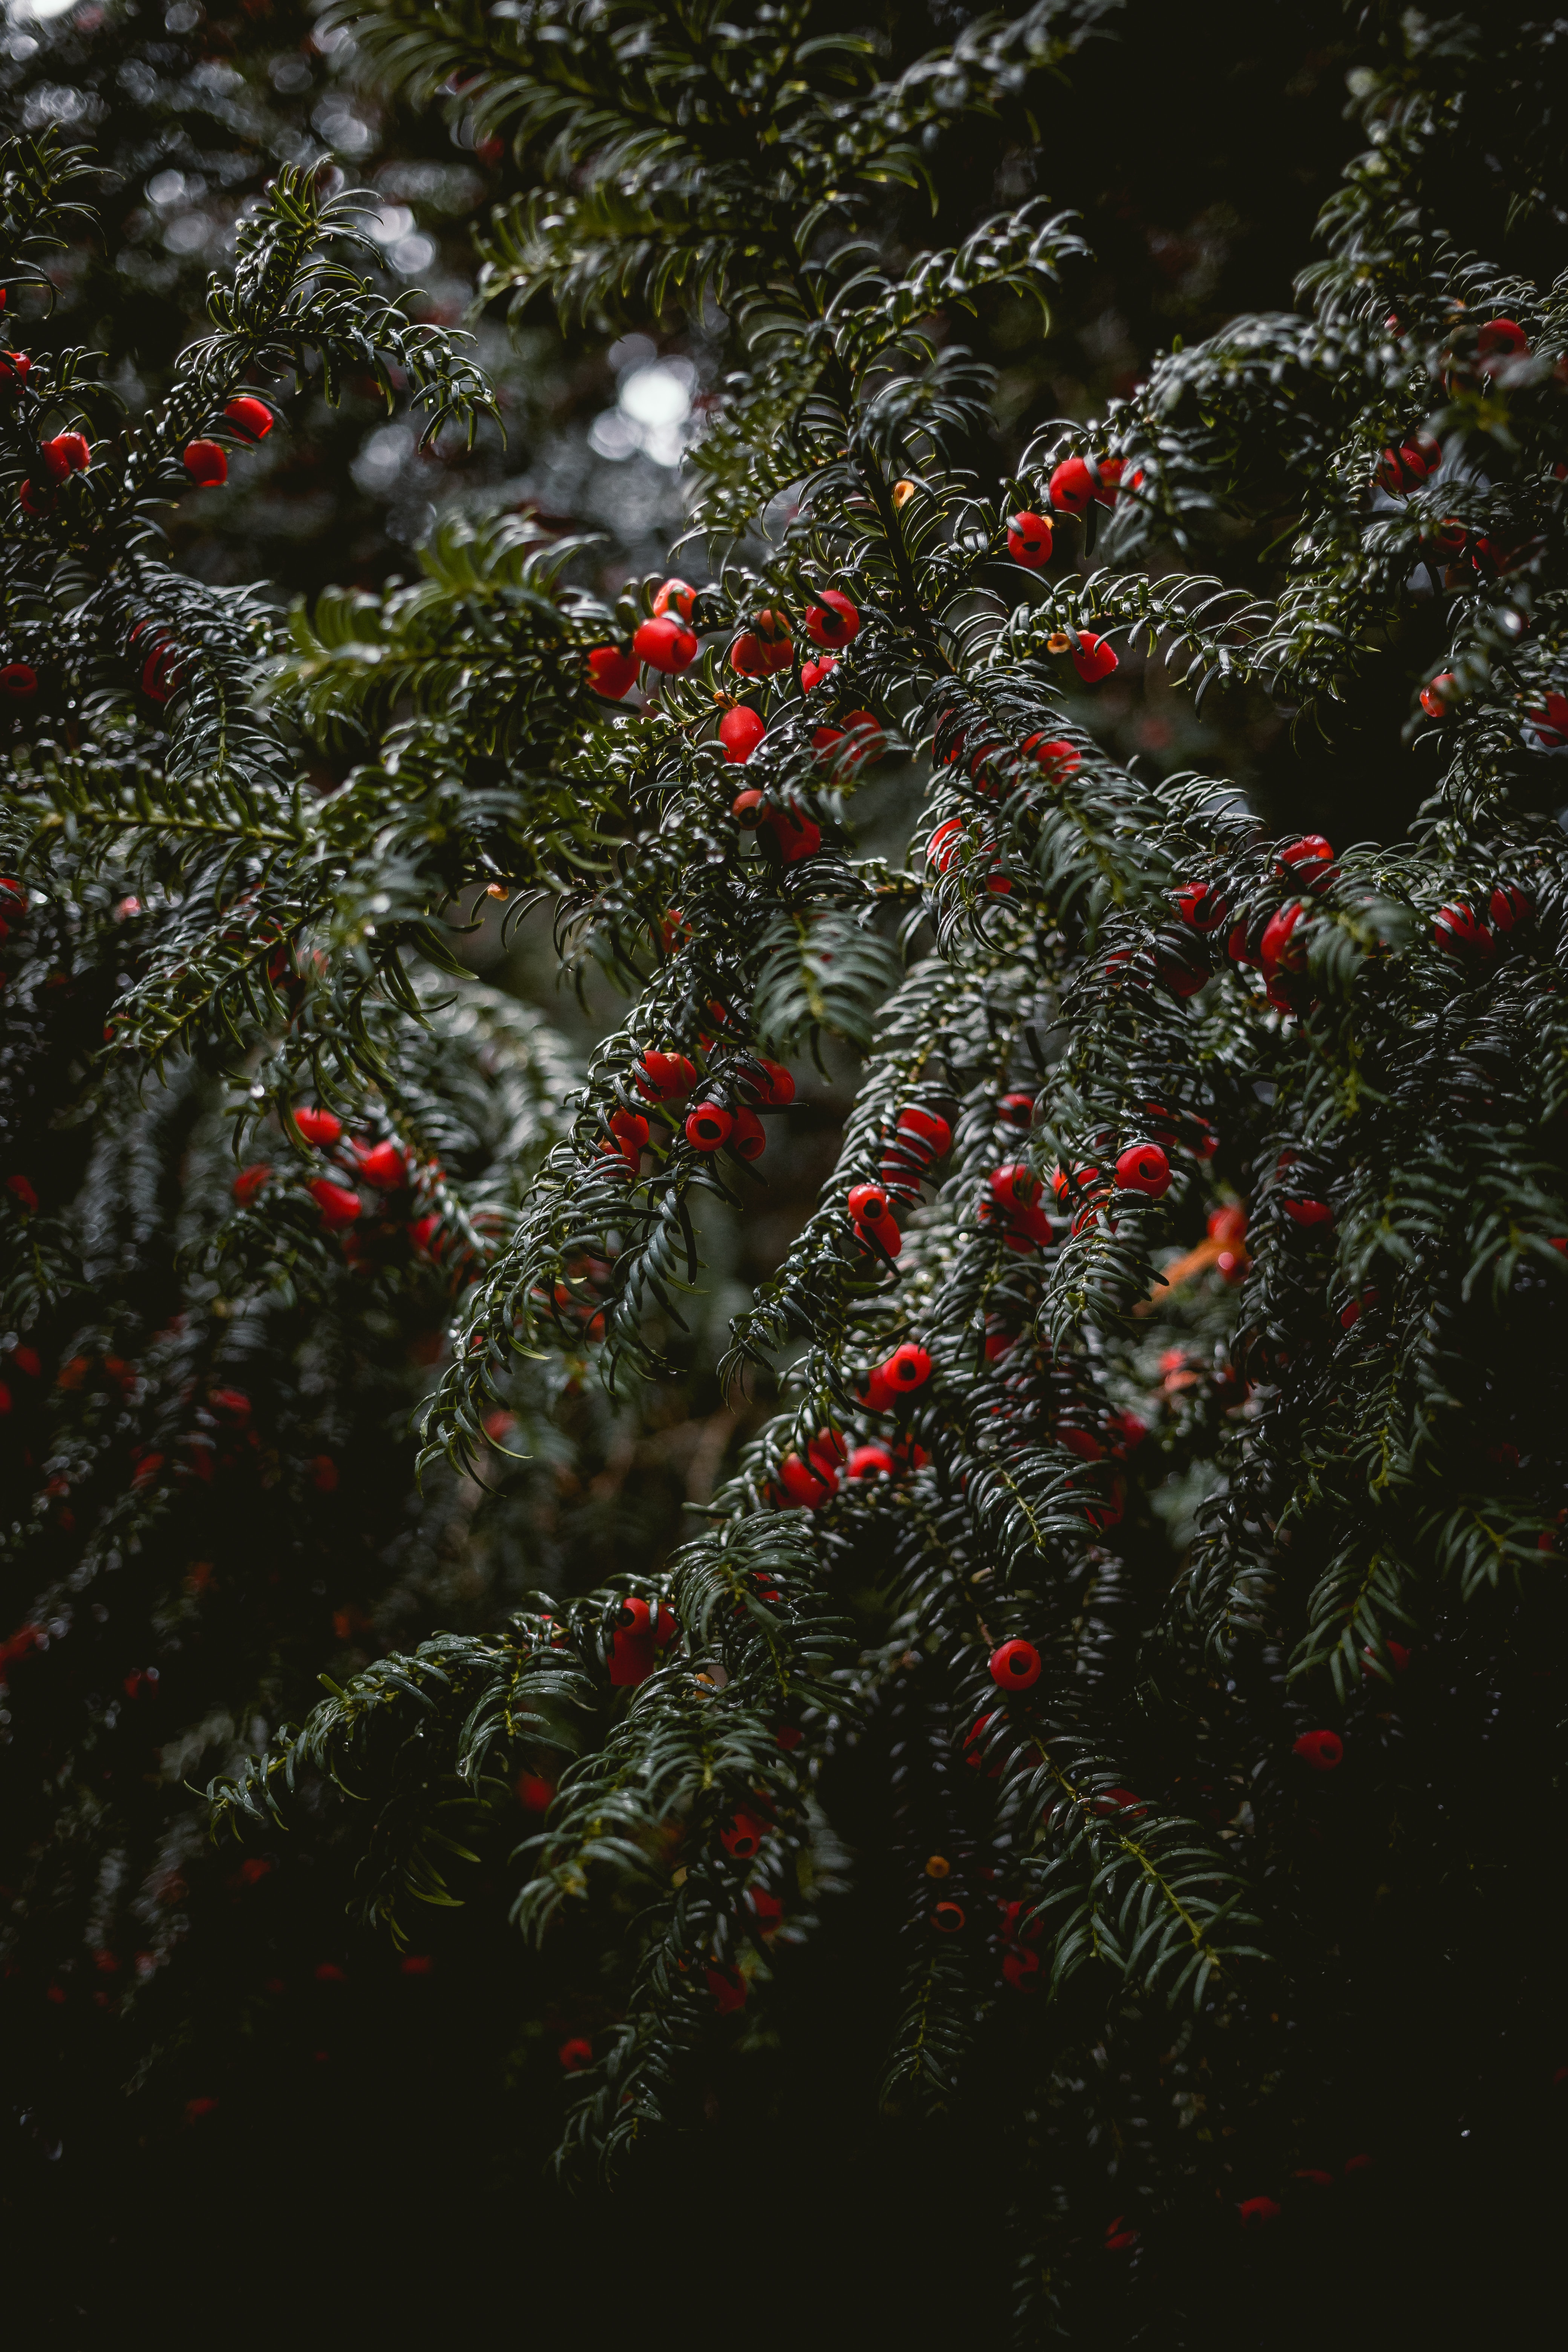 wet, nature, berries, red, plant, branches UHD